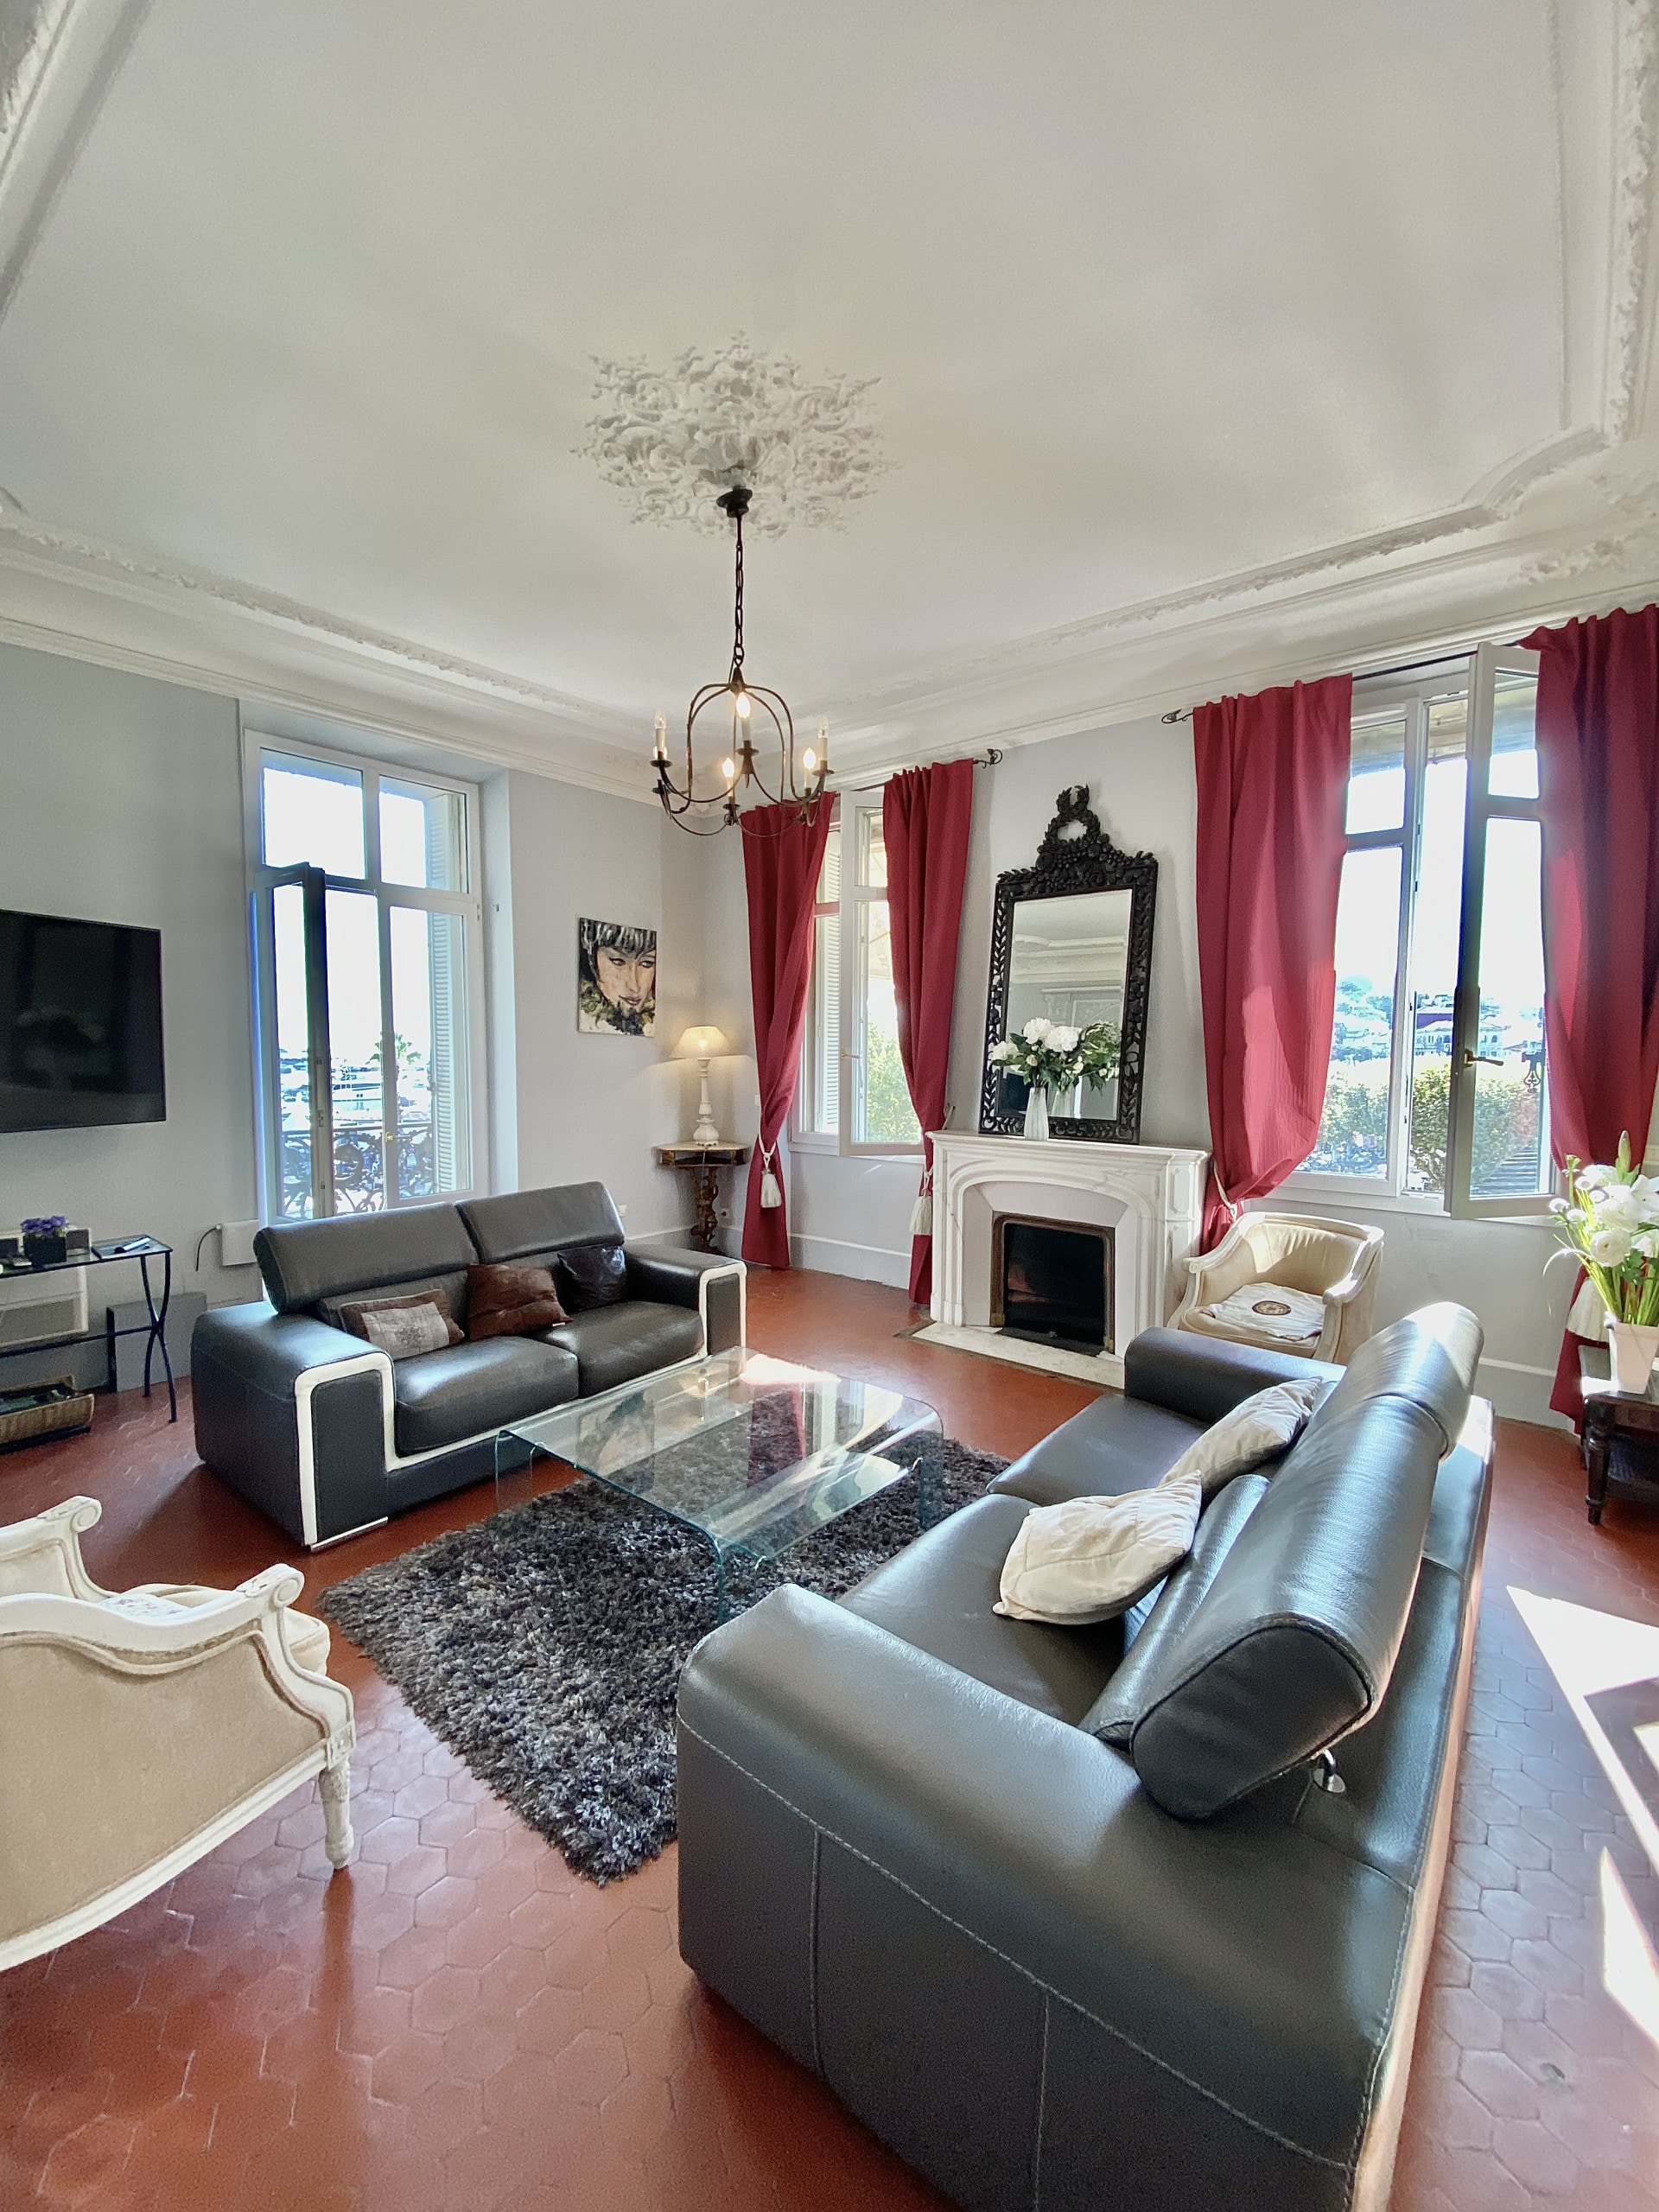 Property Image 1 - 3 bedroom apartment, that is one street away from Palais de Festivals